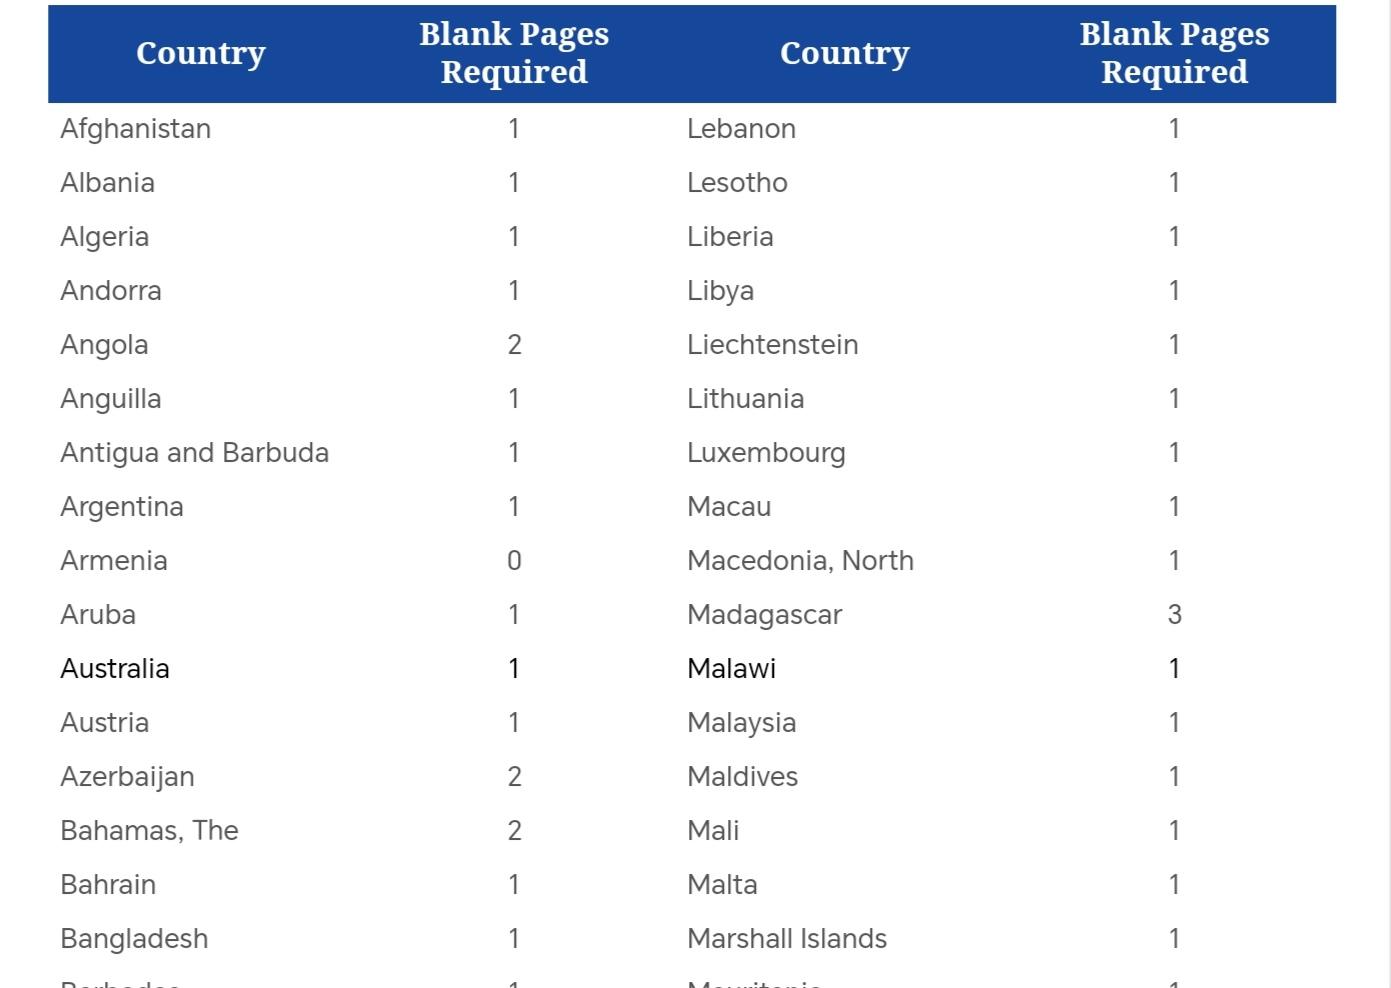 Blank pages required for various passports